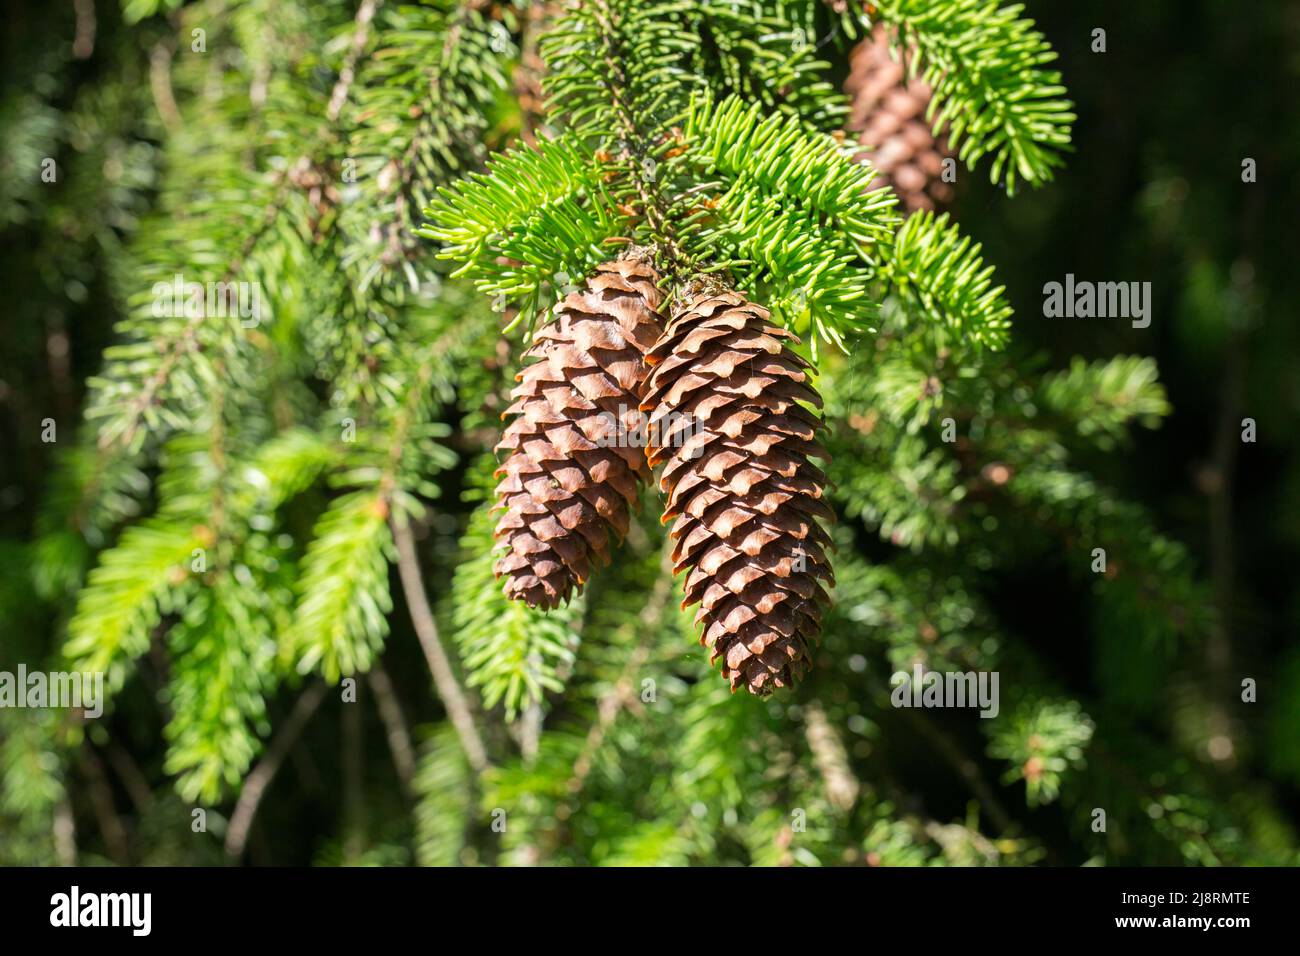 Close-up of two fir cones hanging on the branches of a conifer tree. Stock Photo